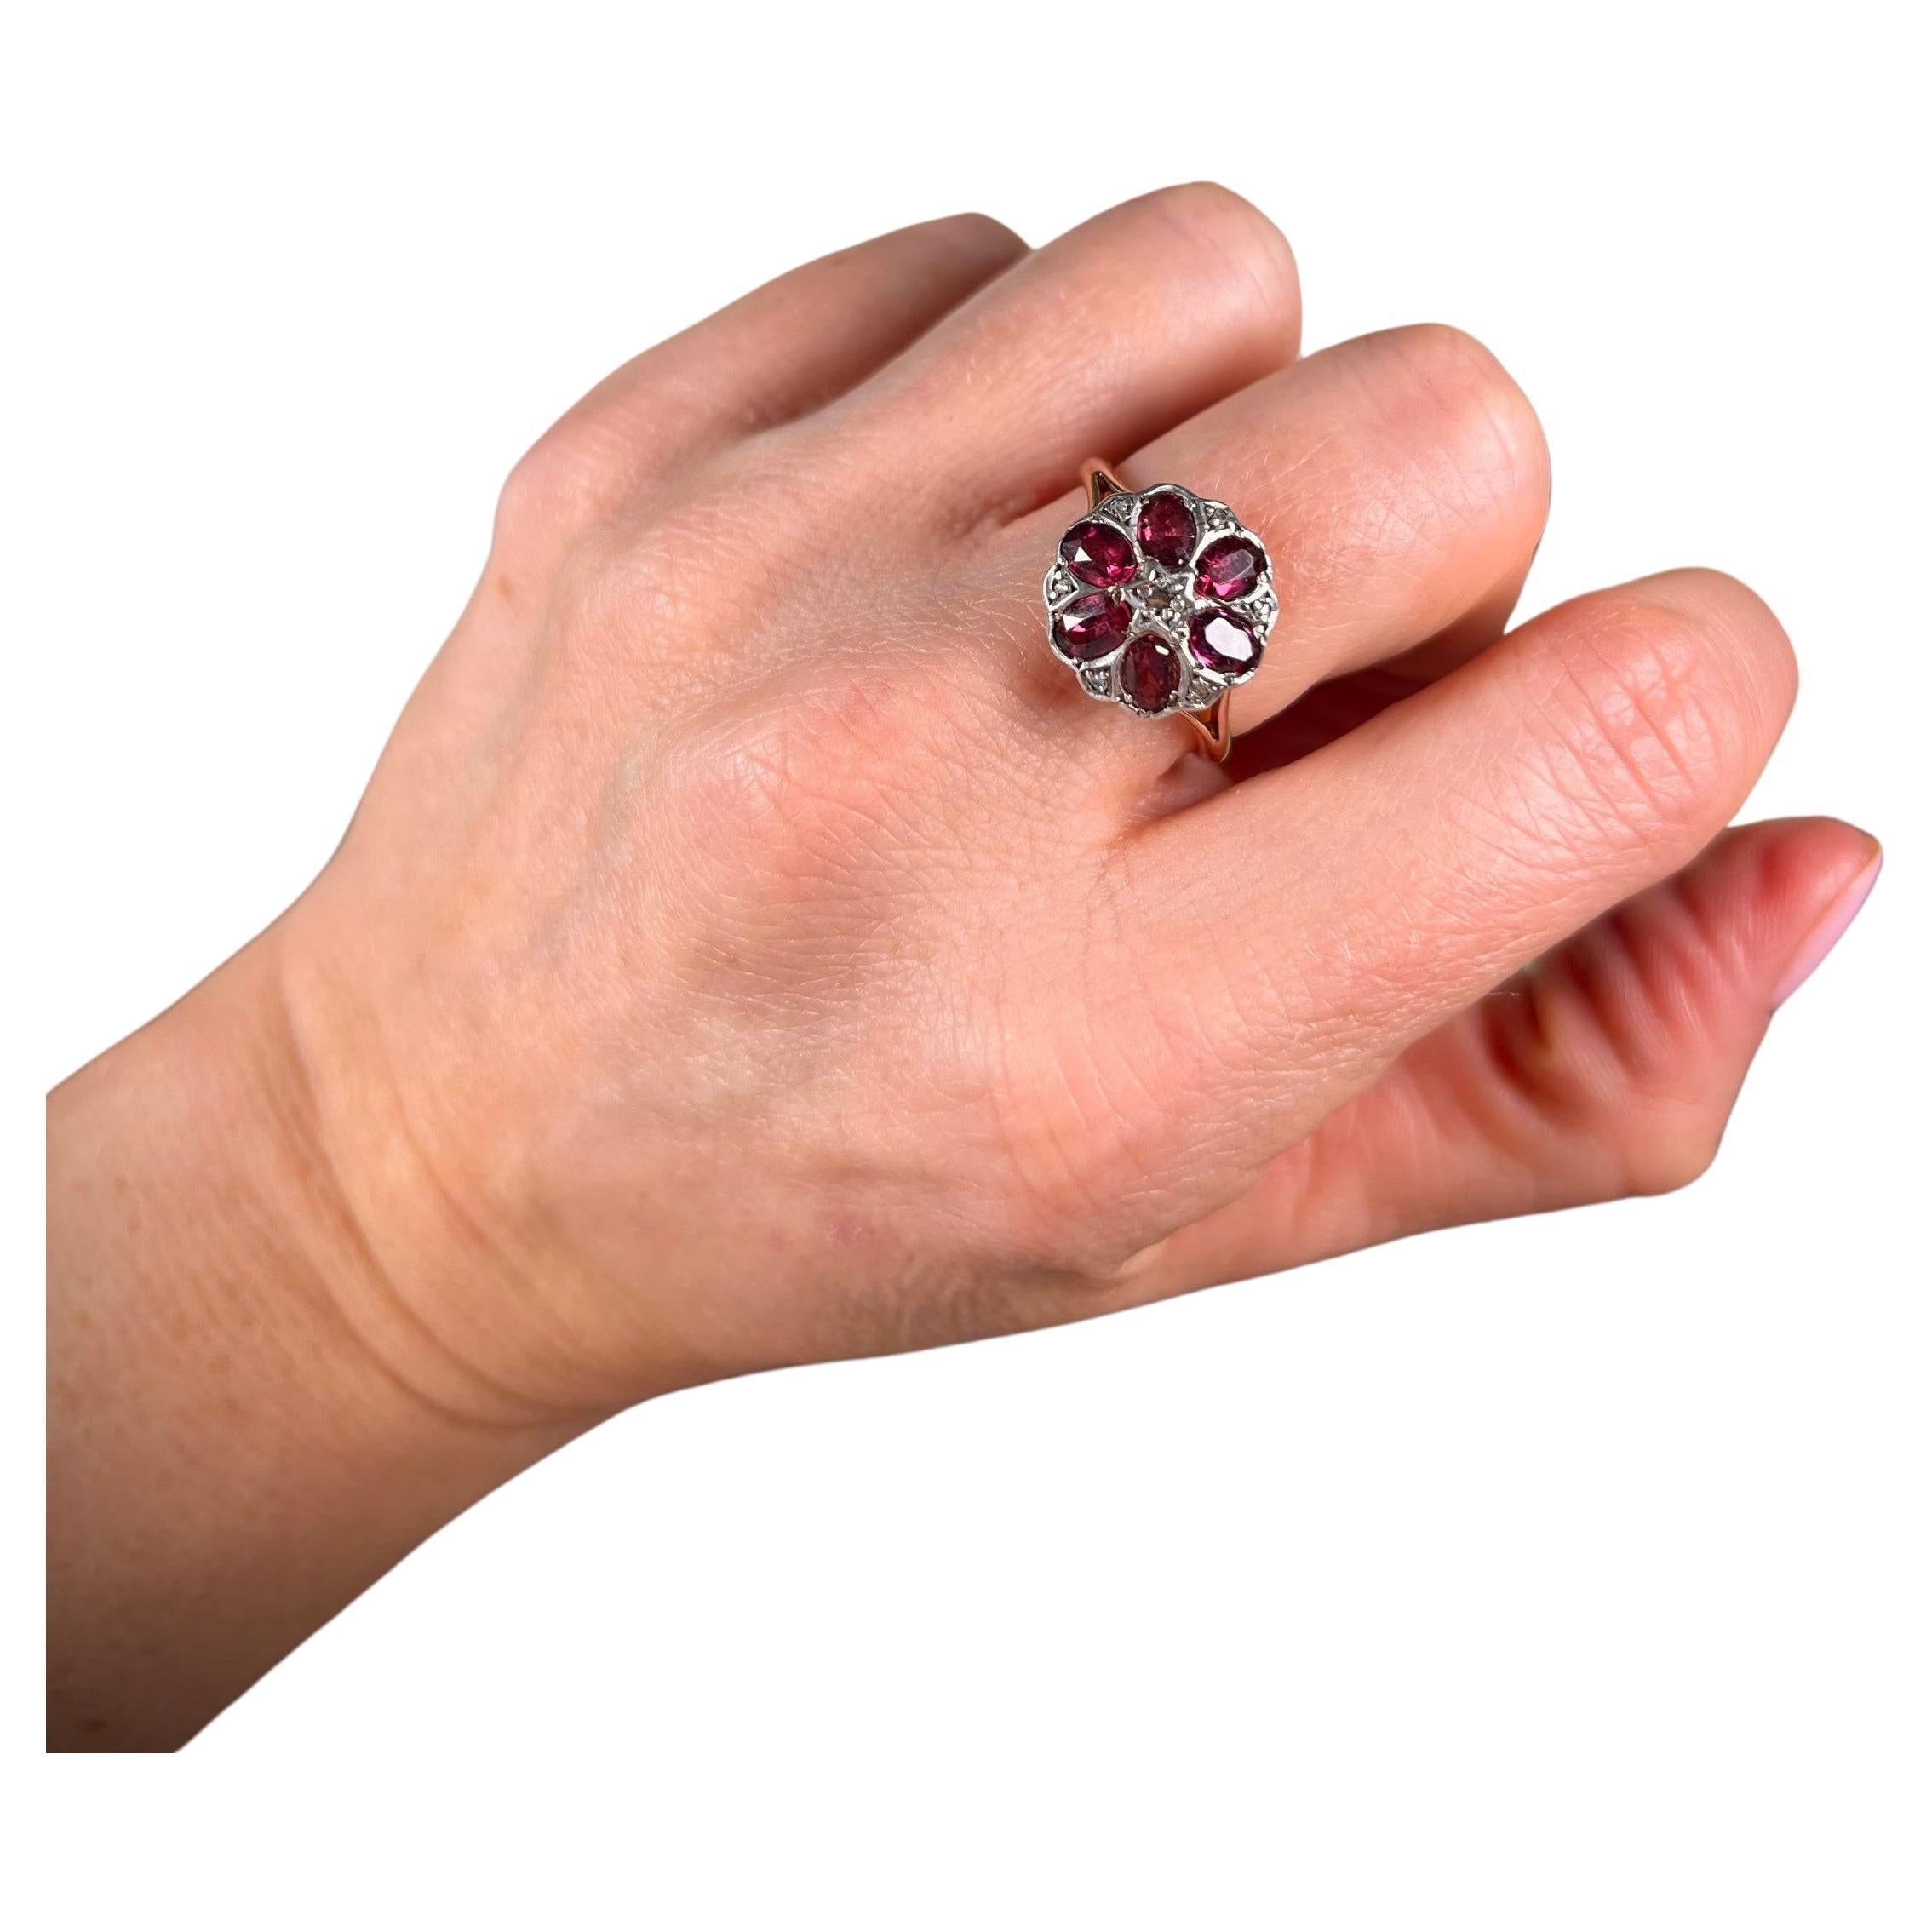 9ct Gold Garnet & Diamond Daisy Cluster Ring Set with Faceted Garnet Petals   For Sale